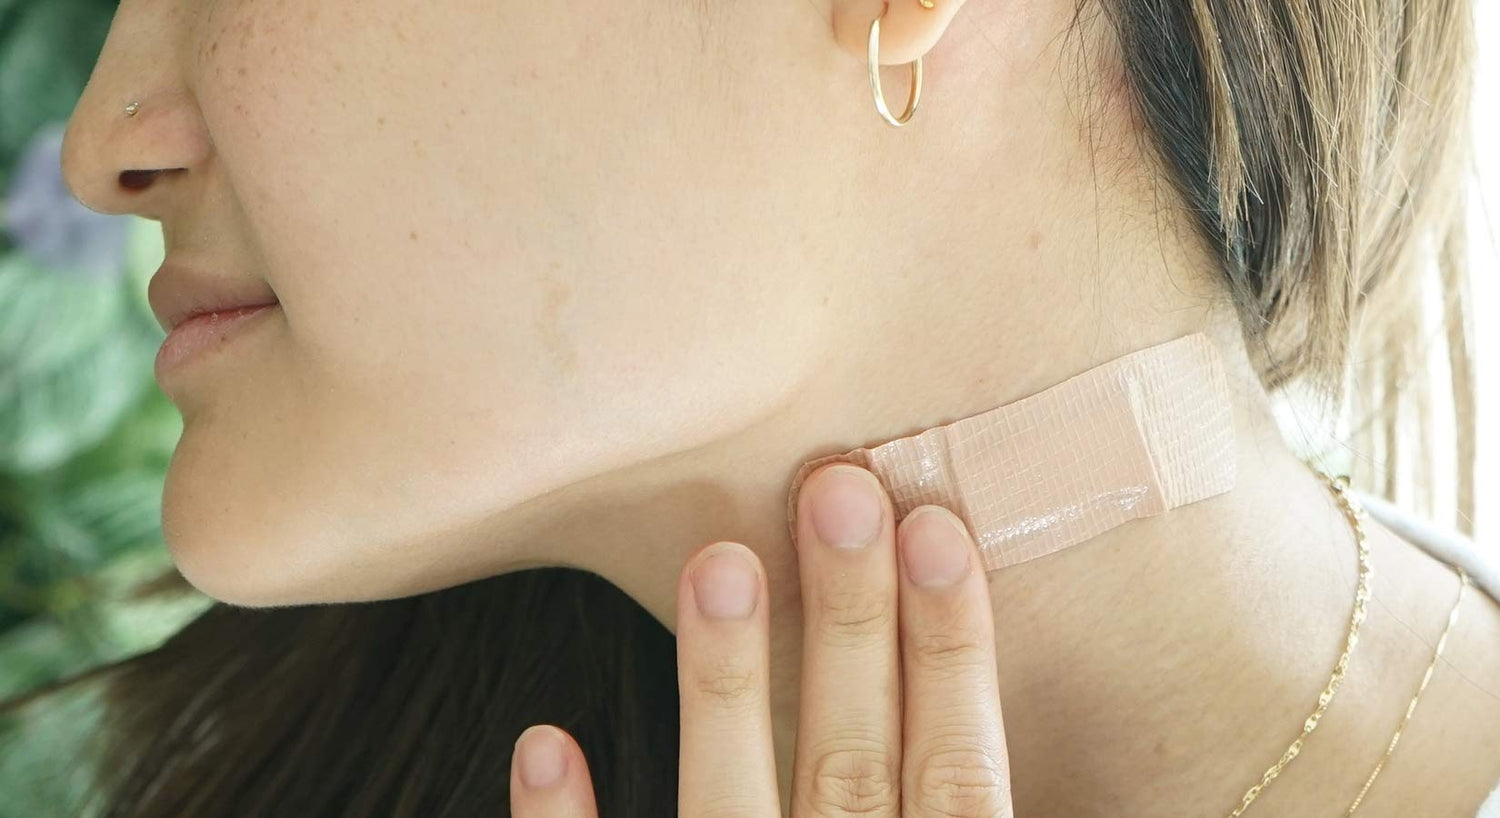 How to Patch Test Skincare Products